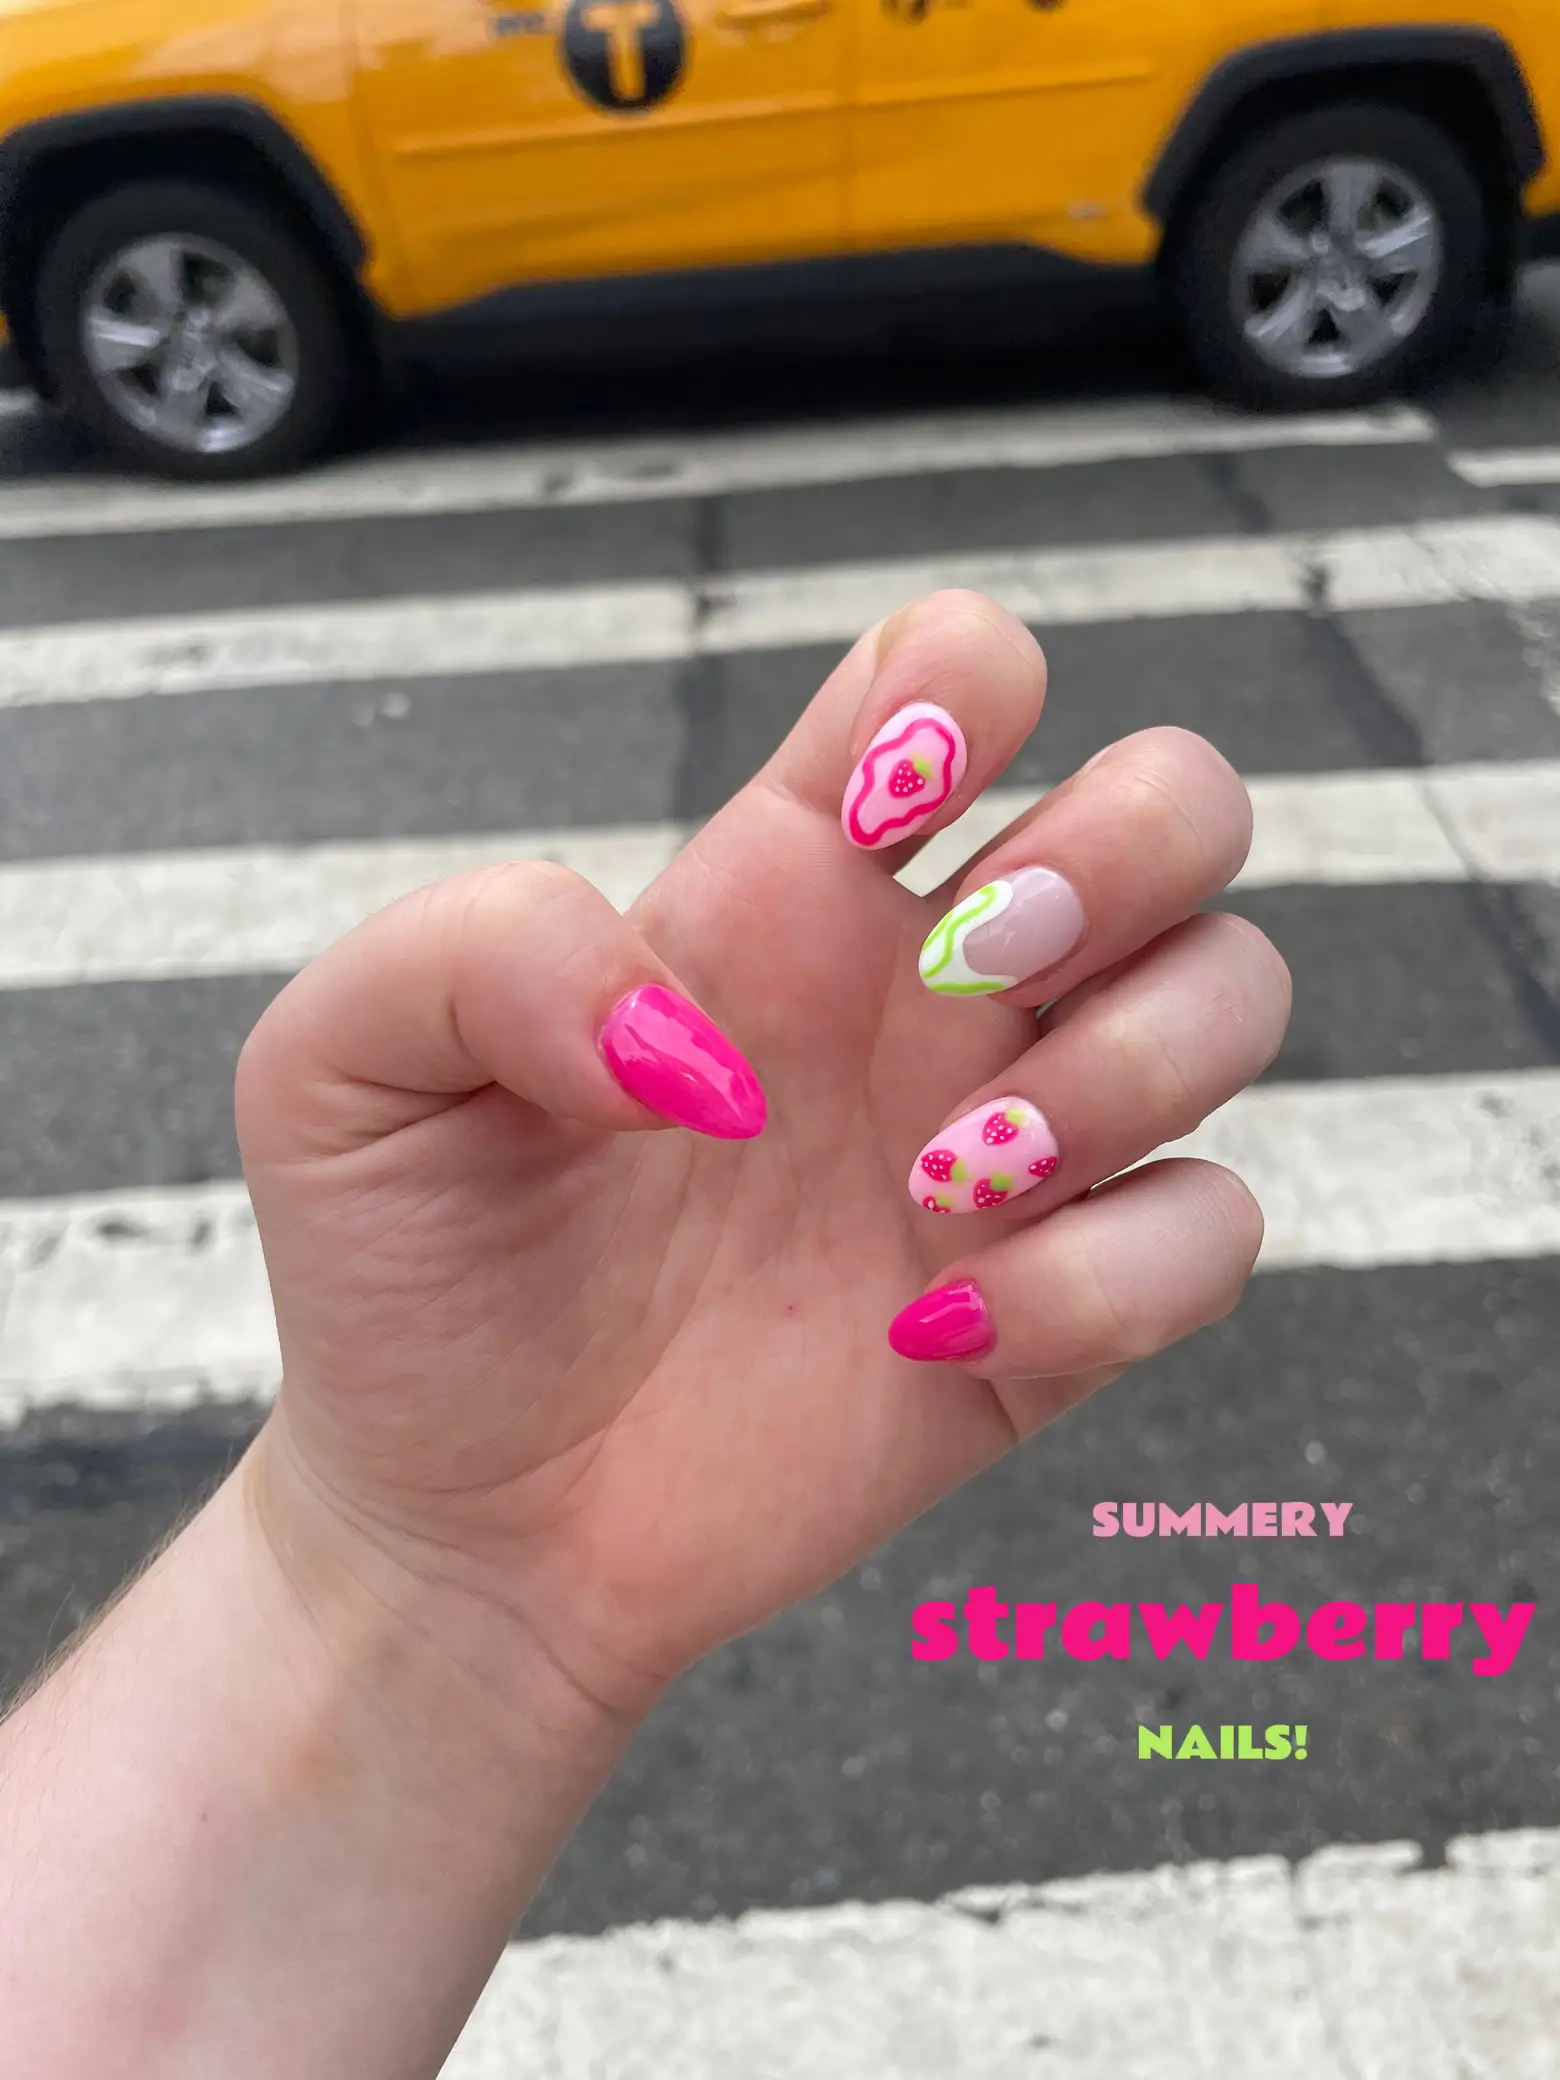 strawberry nail art 💅🏻🍓, Gallery posted by Bailey ✨